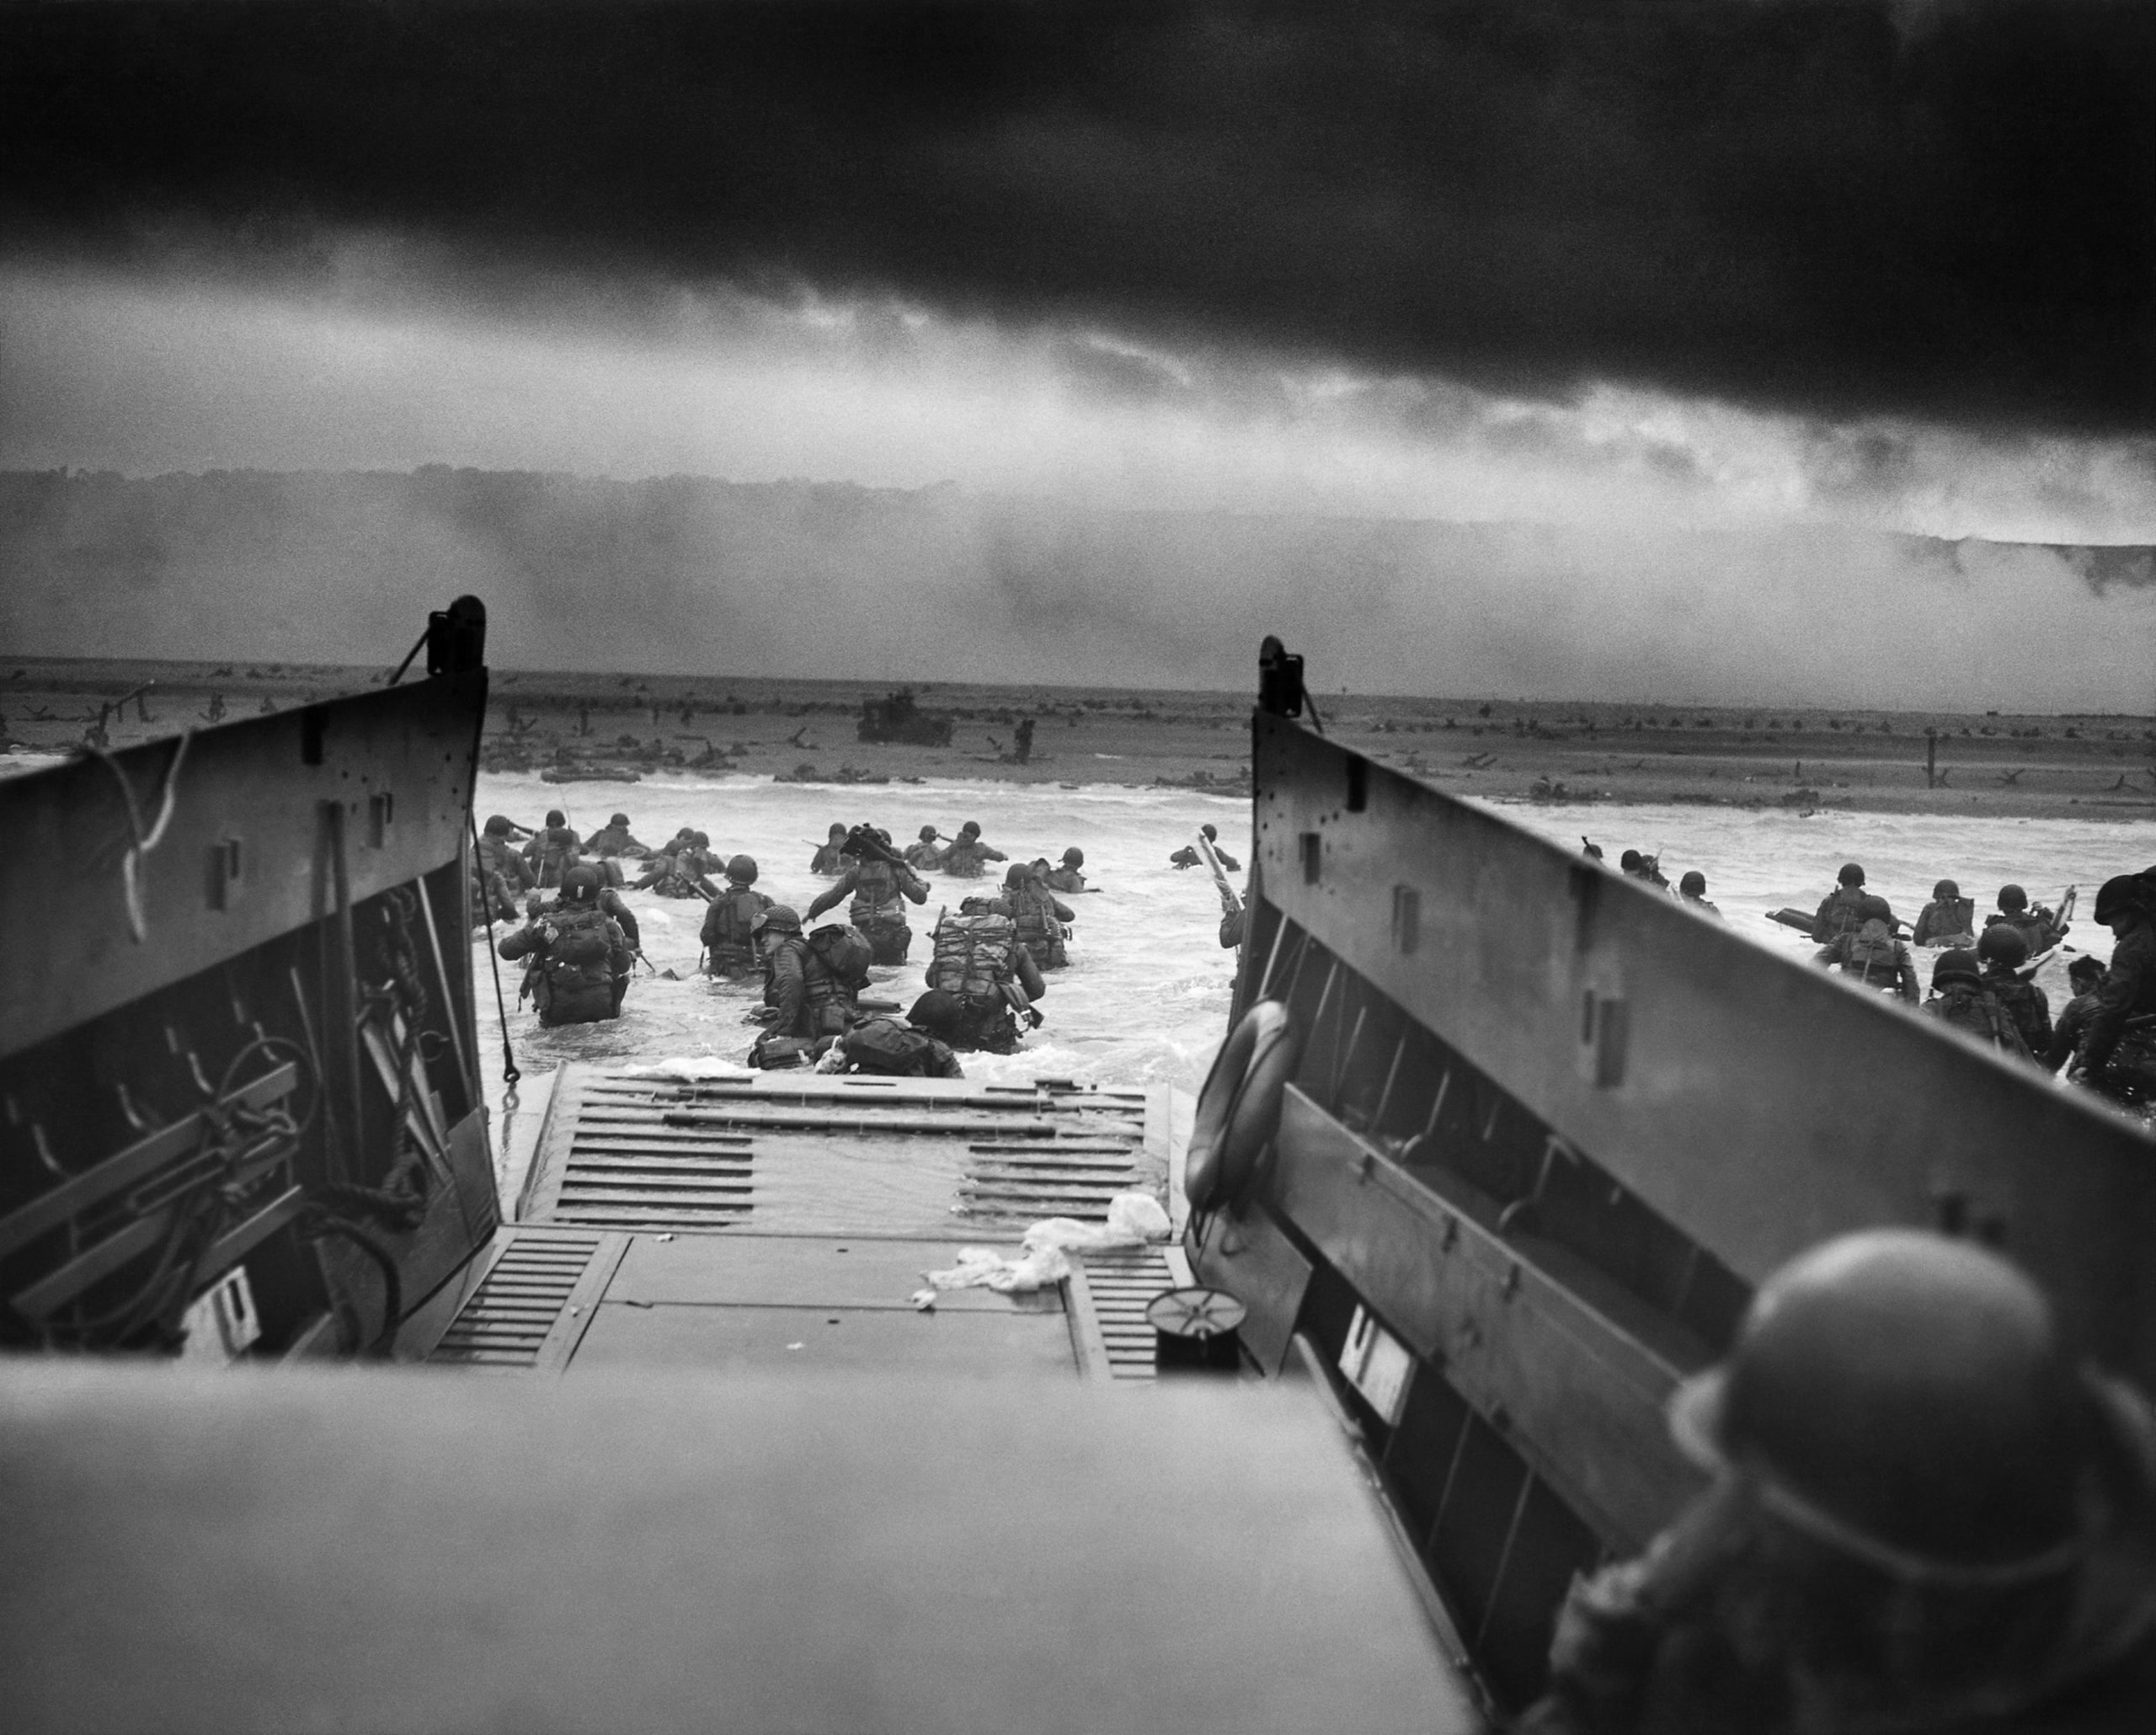 D-DAY: What it was like on Omaha Beach as a combat medic in WWII